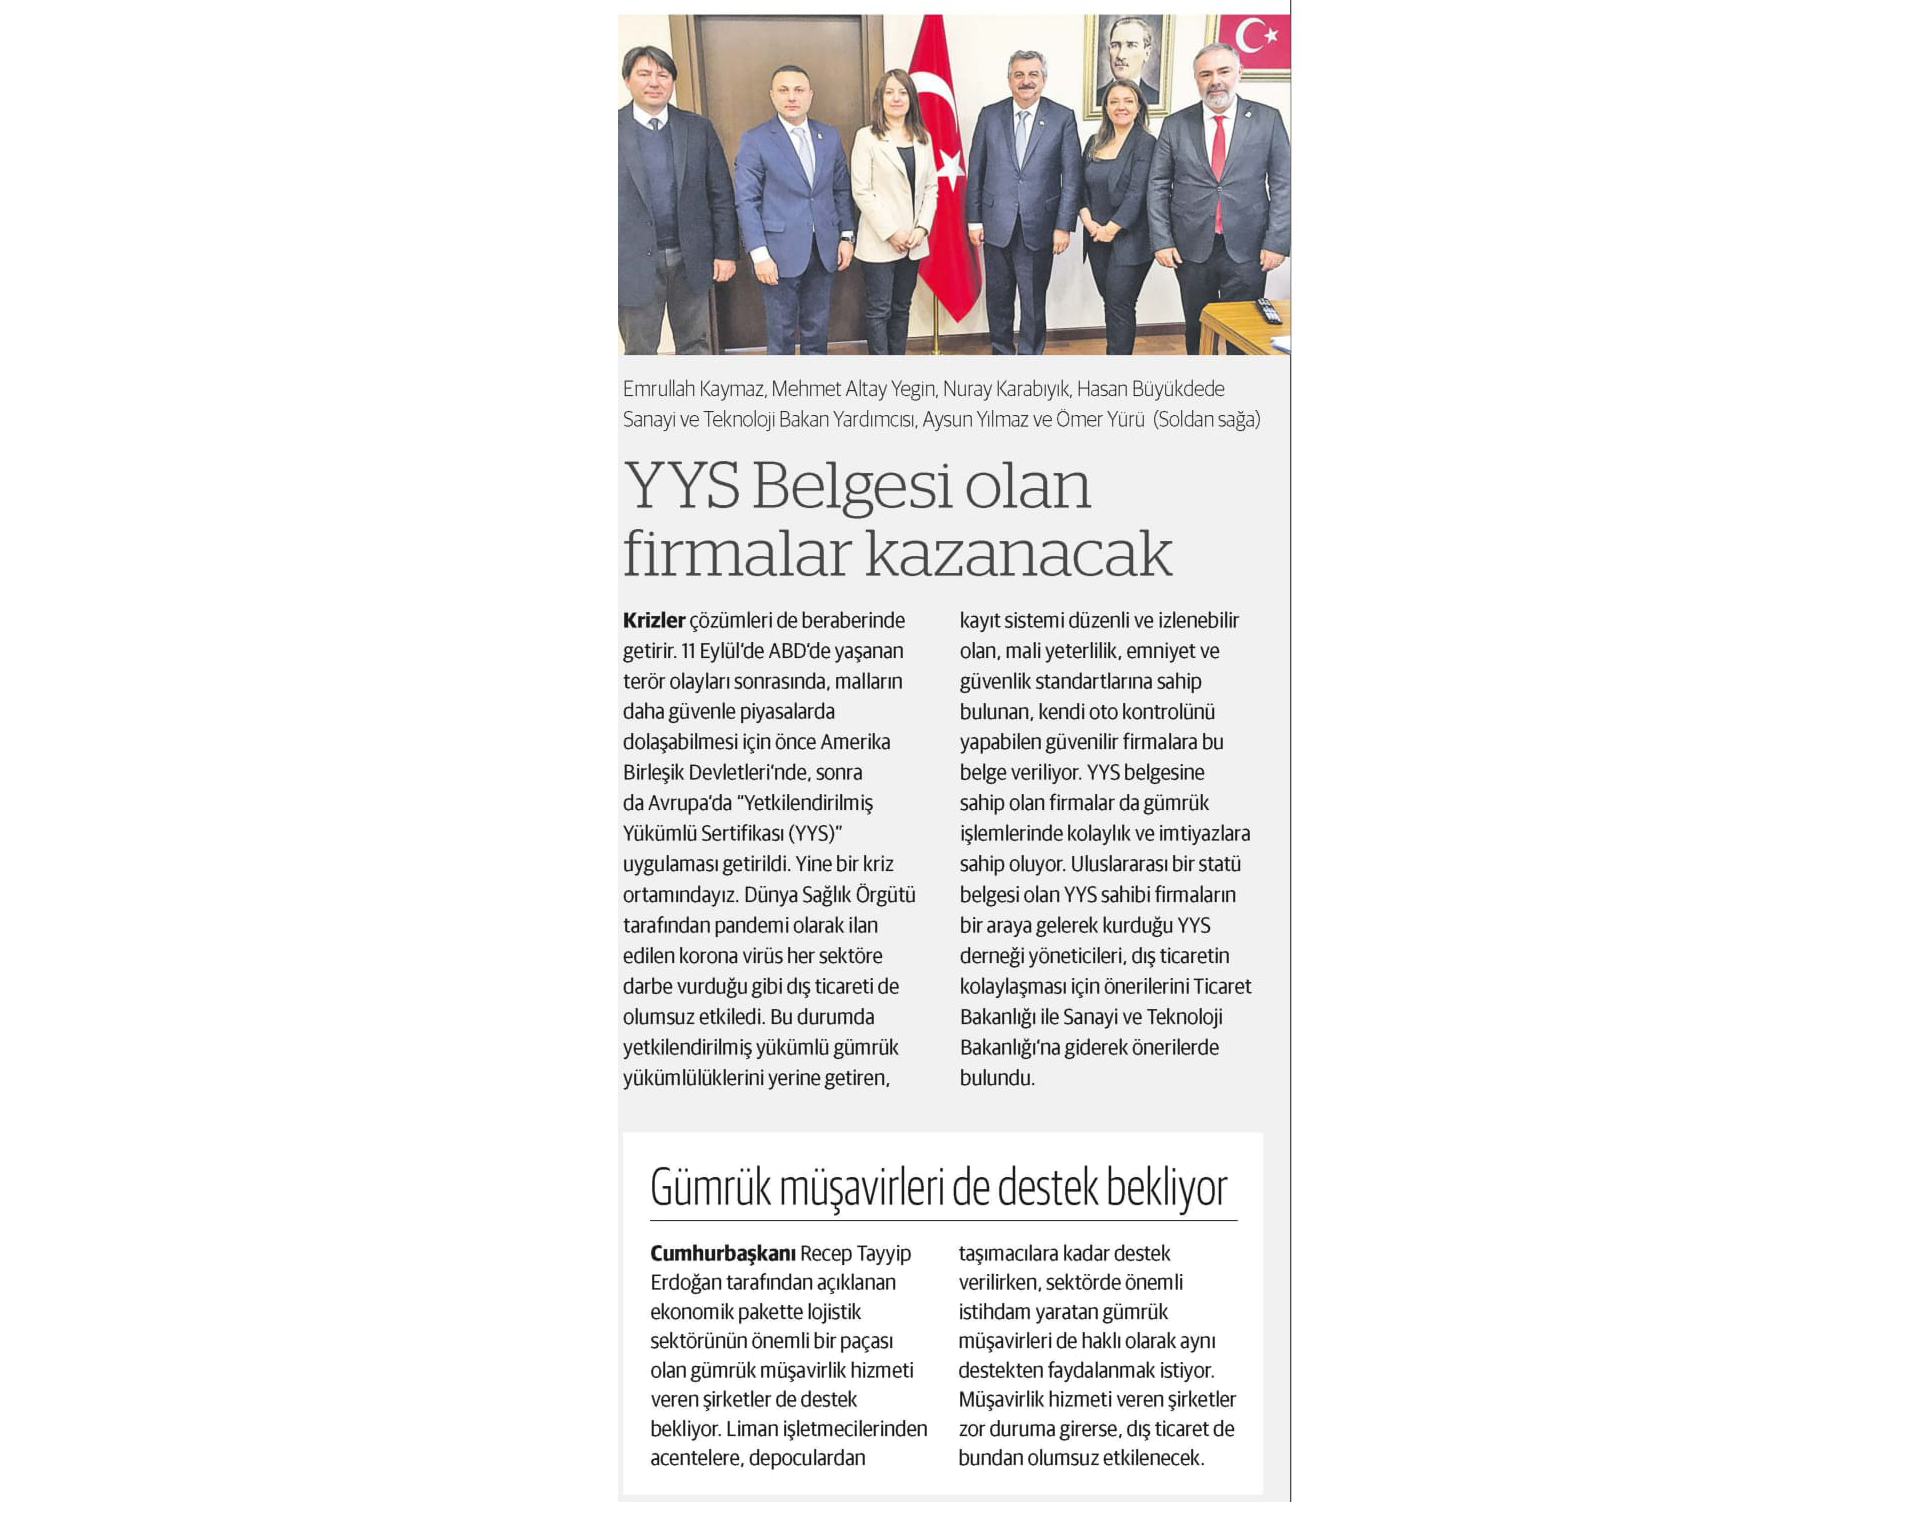 The jornalist of Dünya Newspaper, Mr. Sami ALTINKAYA, Has Written The Support We Have Given In His Article.